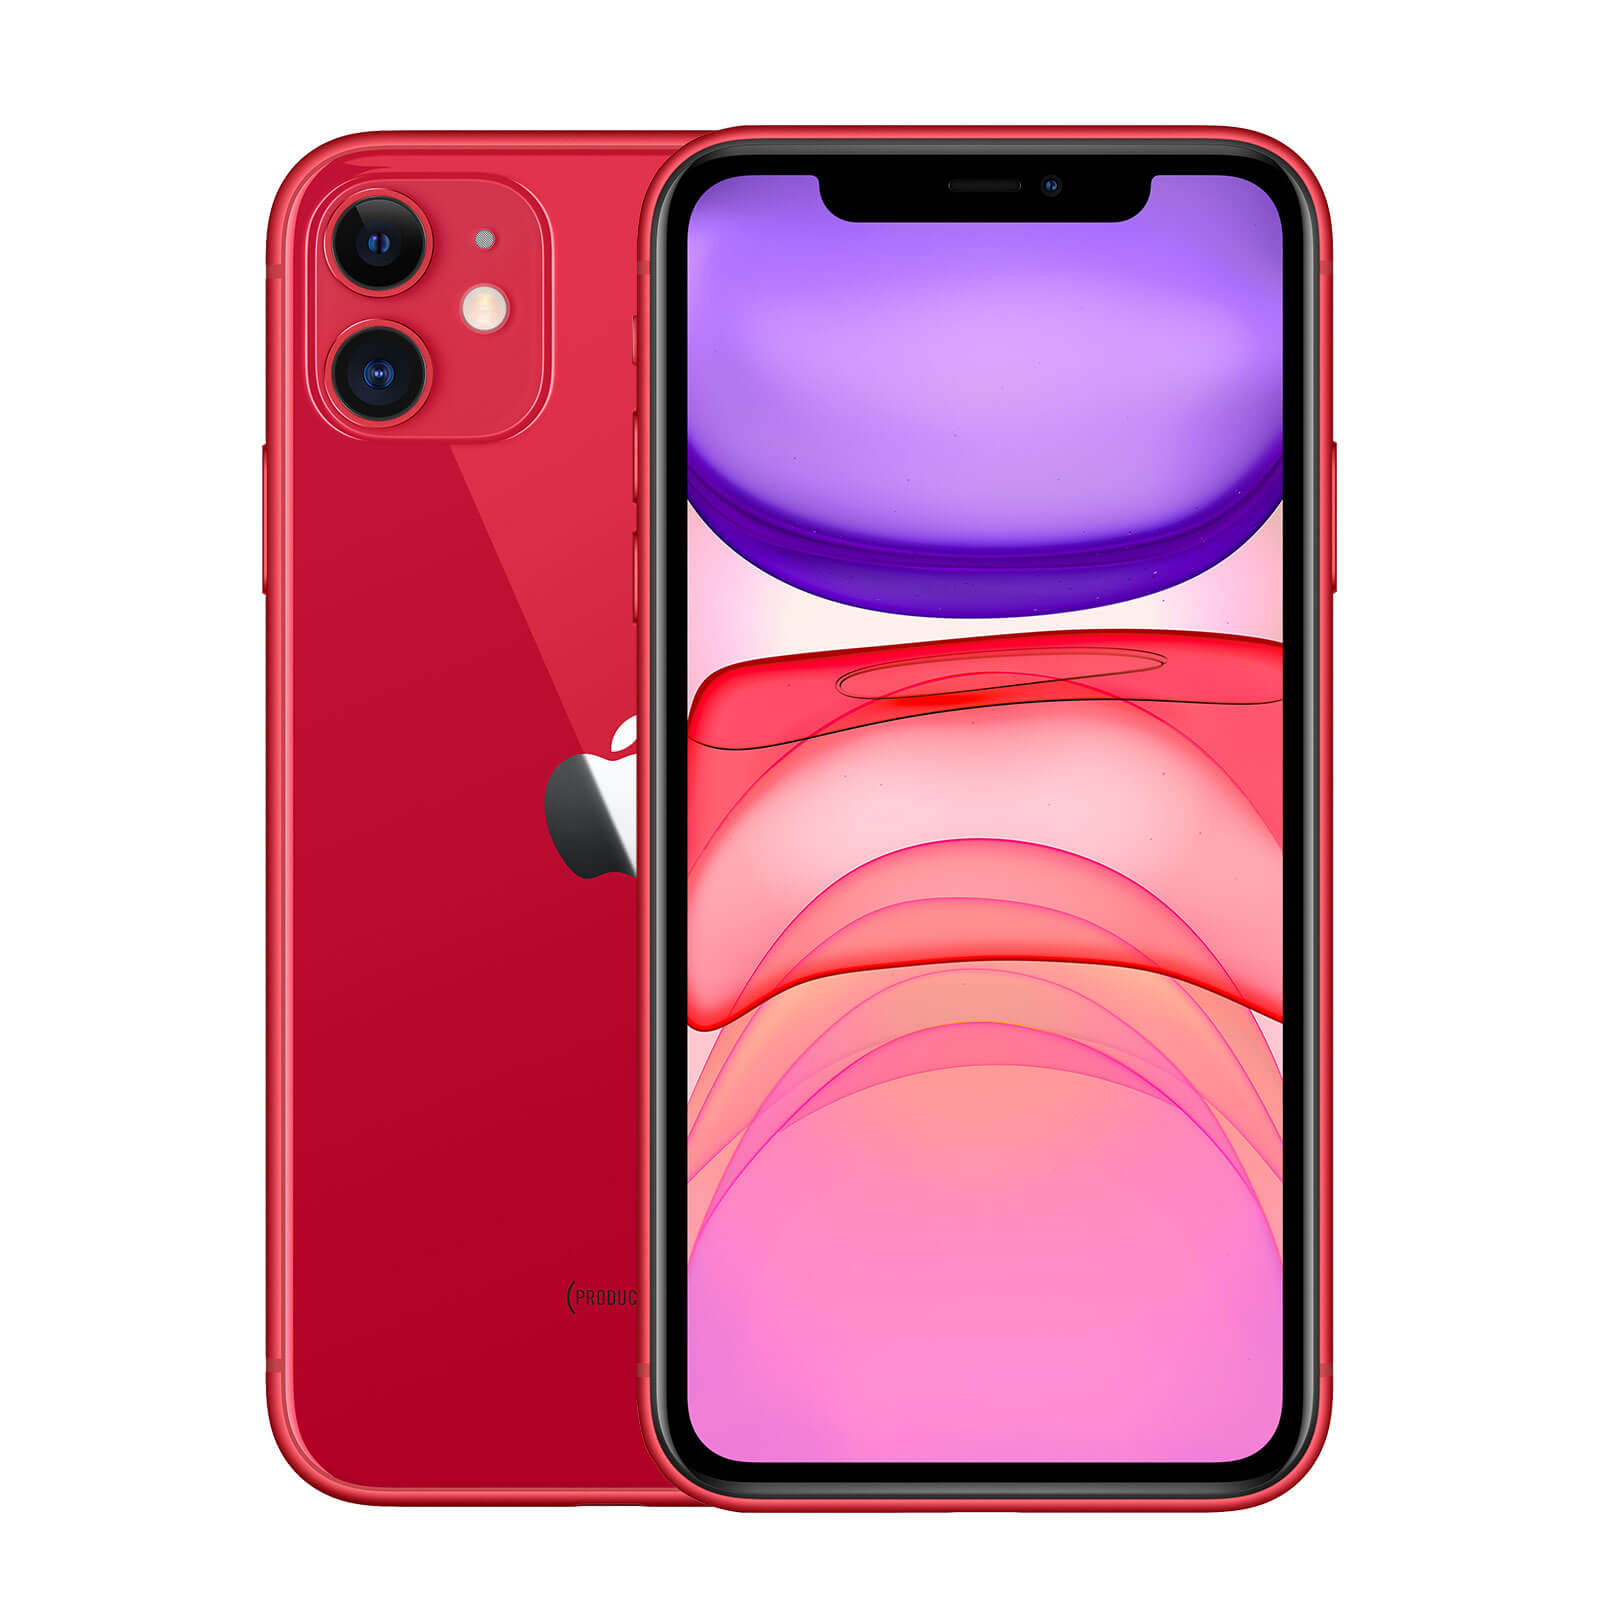 Apple iPhone 11 64GB Product Red Good - T-Mobile